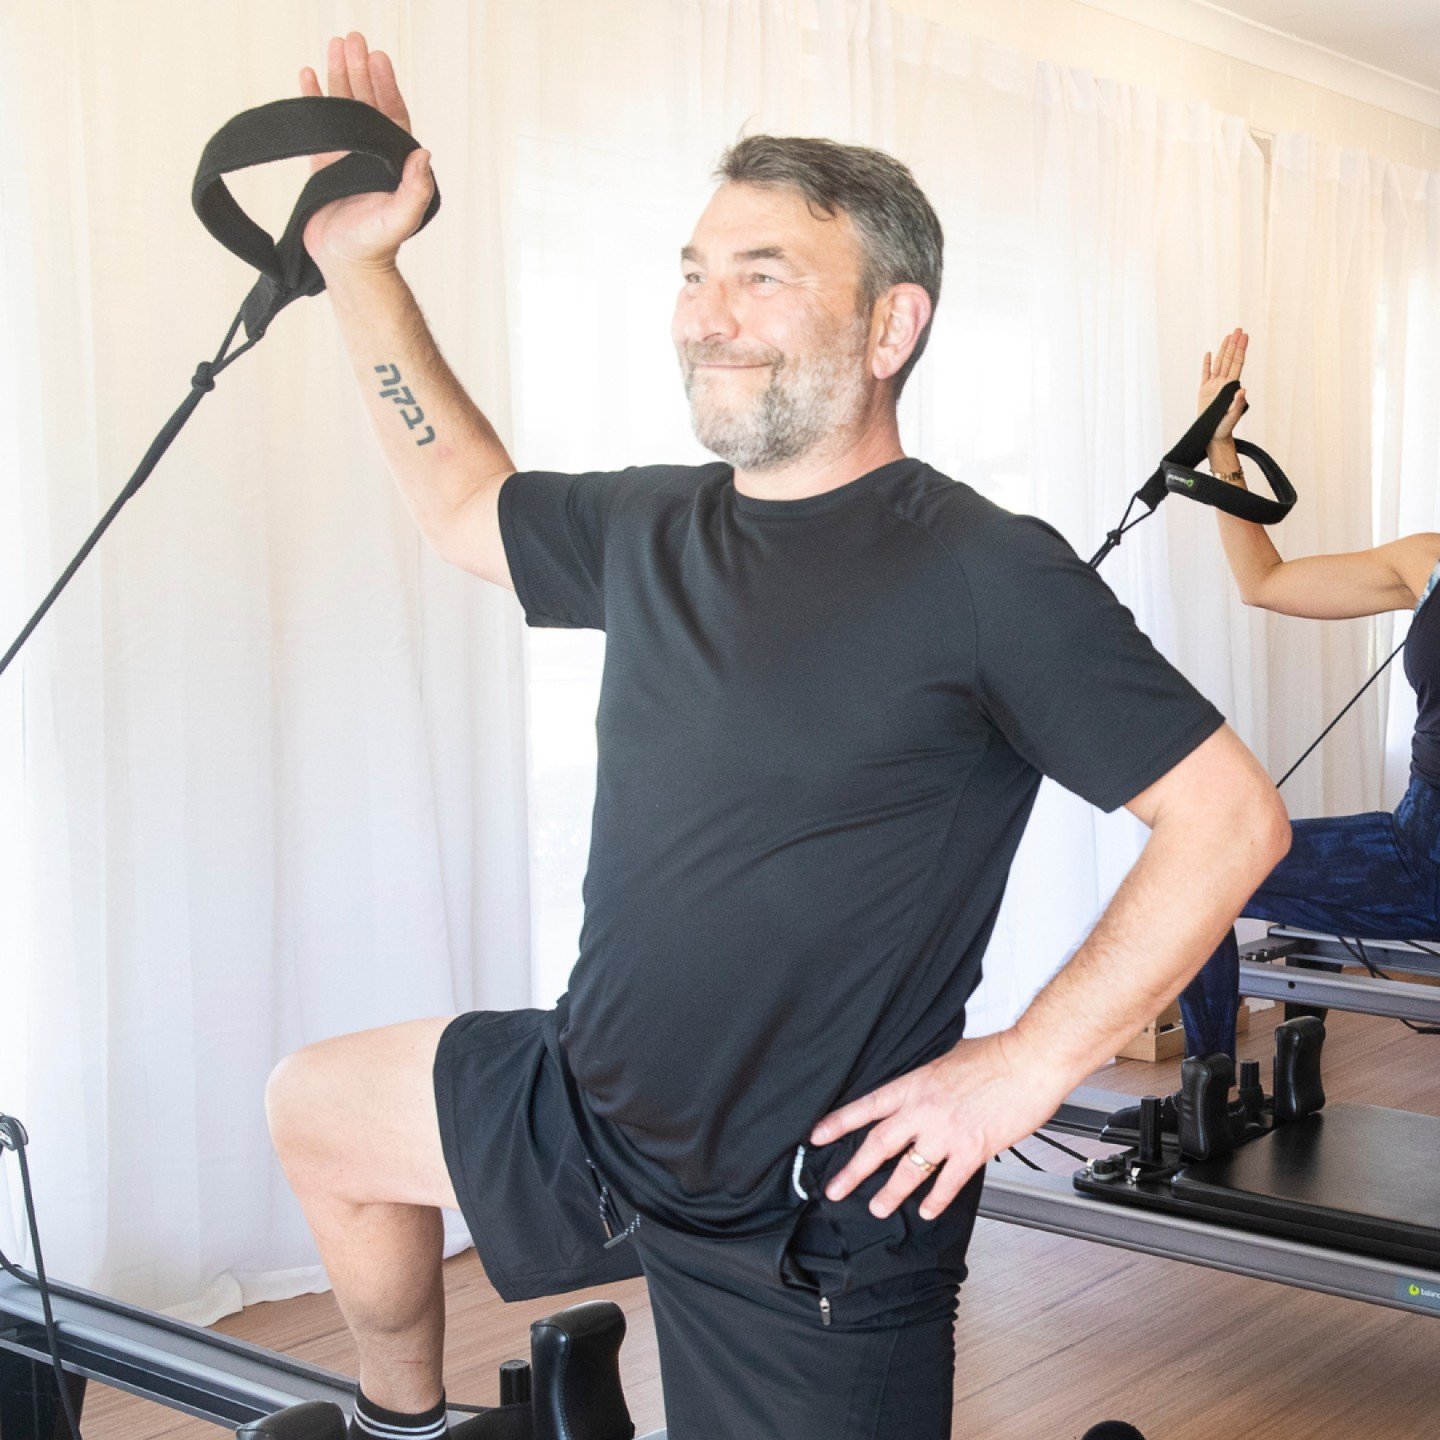 💪Are you looking for a workout that will challenge you, increase your flexibility, and improve your core strength? Look no further! Join our men&rsquo;s reformer class on Thursdays at 4pm with Fiona! 

🙋&zwj;♂️ This class is specifically designed w